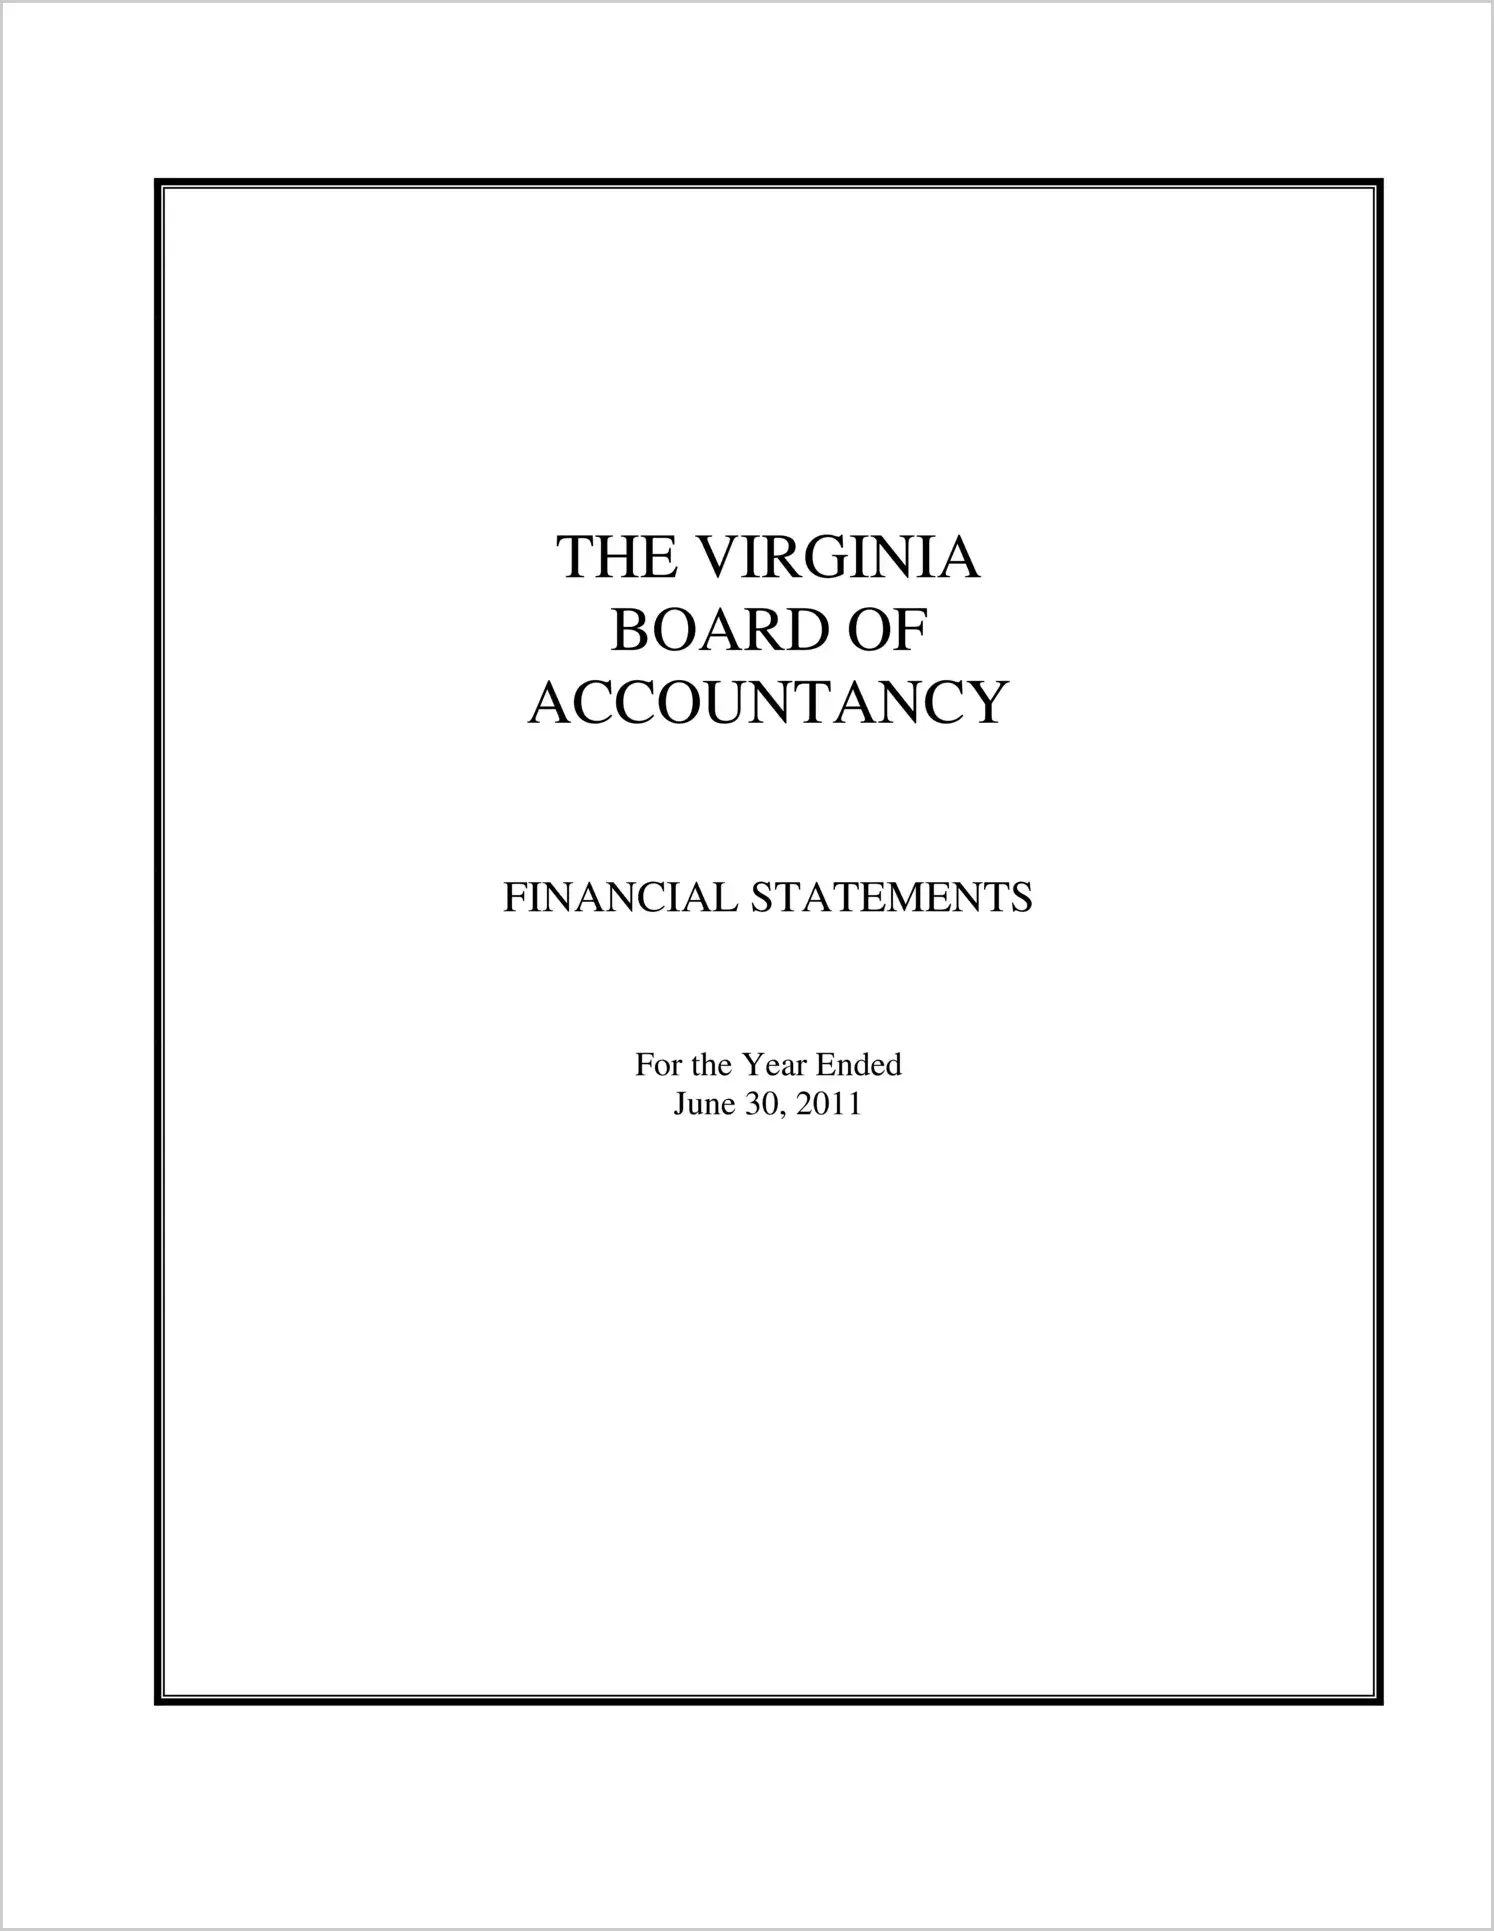 Virginia Board of Accountancy Financial Statements for the year ended June 30, 2011